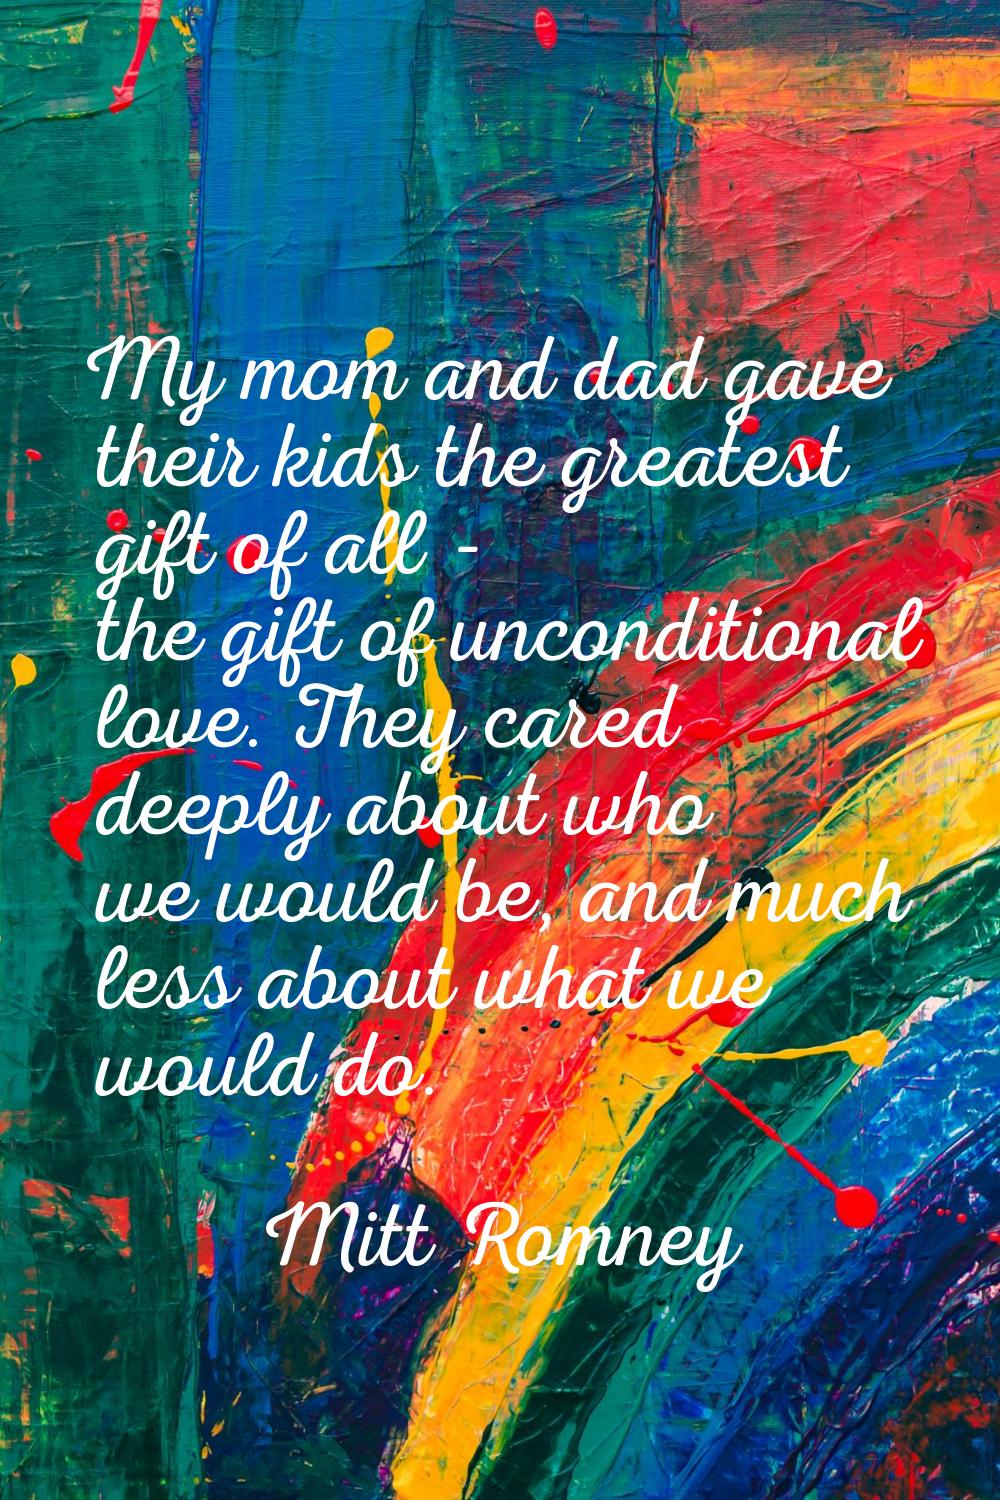 My mom and dad gave their kids the greatest gift of all - the gift of unconditional love. They care